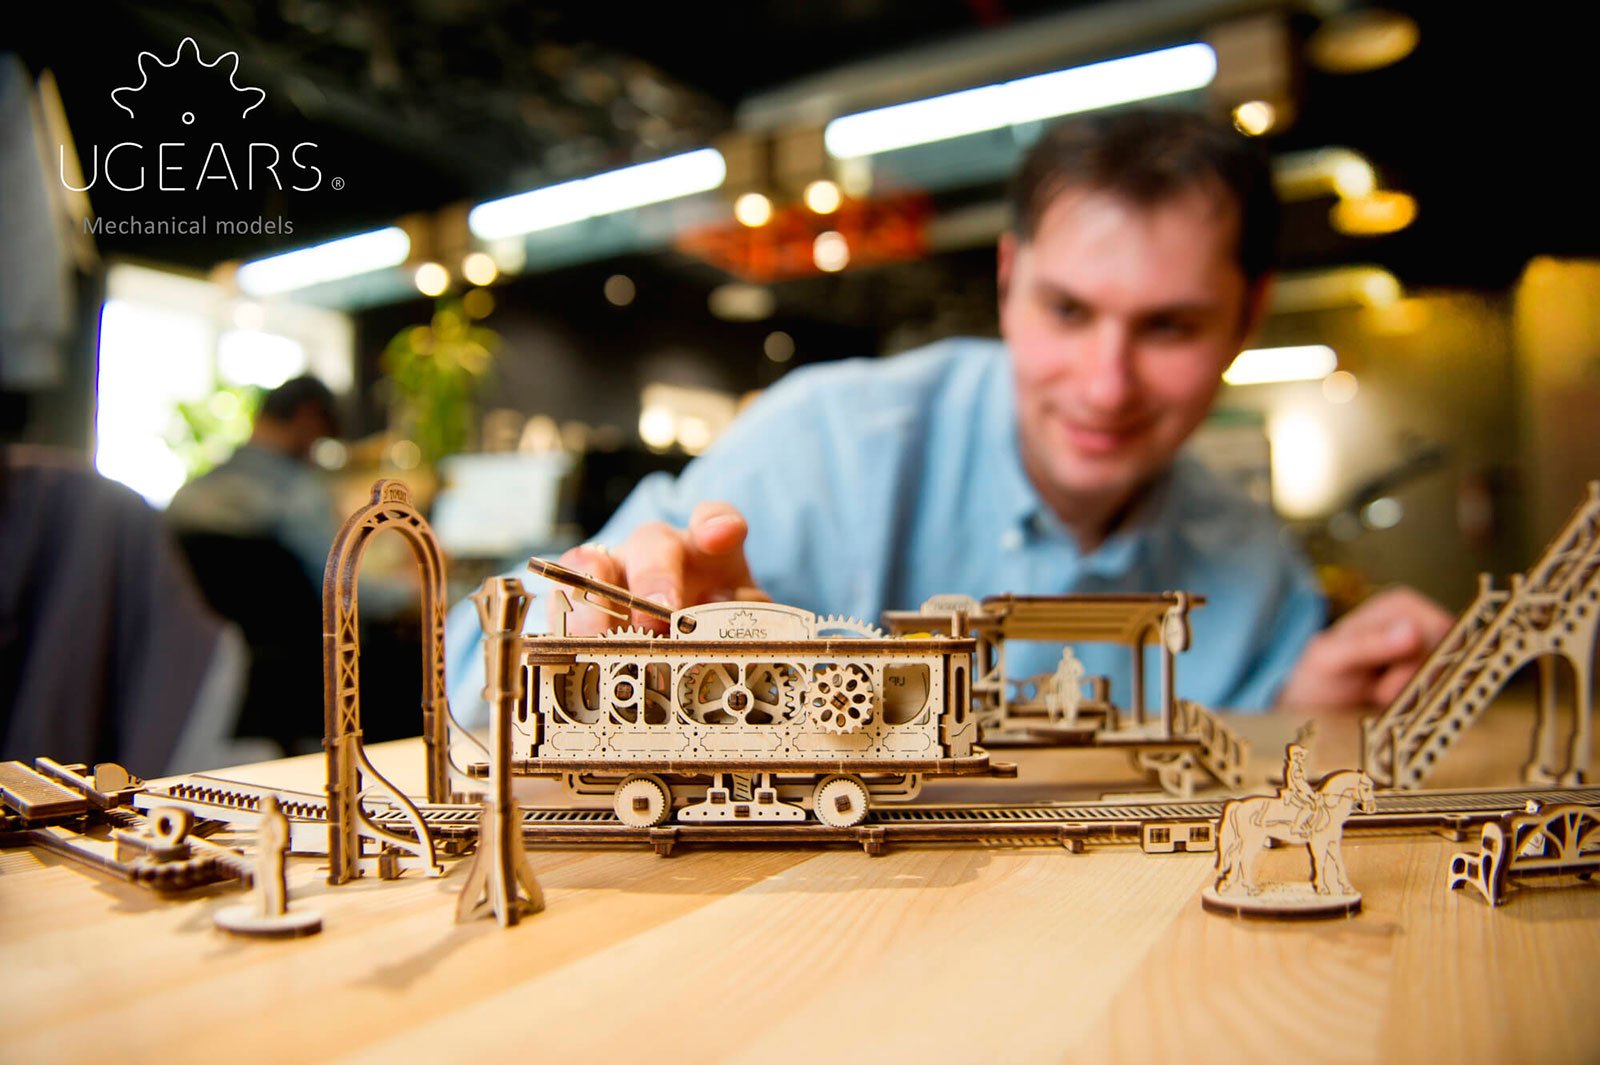 Ugears is happy to present the first  model from the new Mechanical Town Series- Tram Line 6